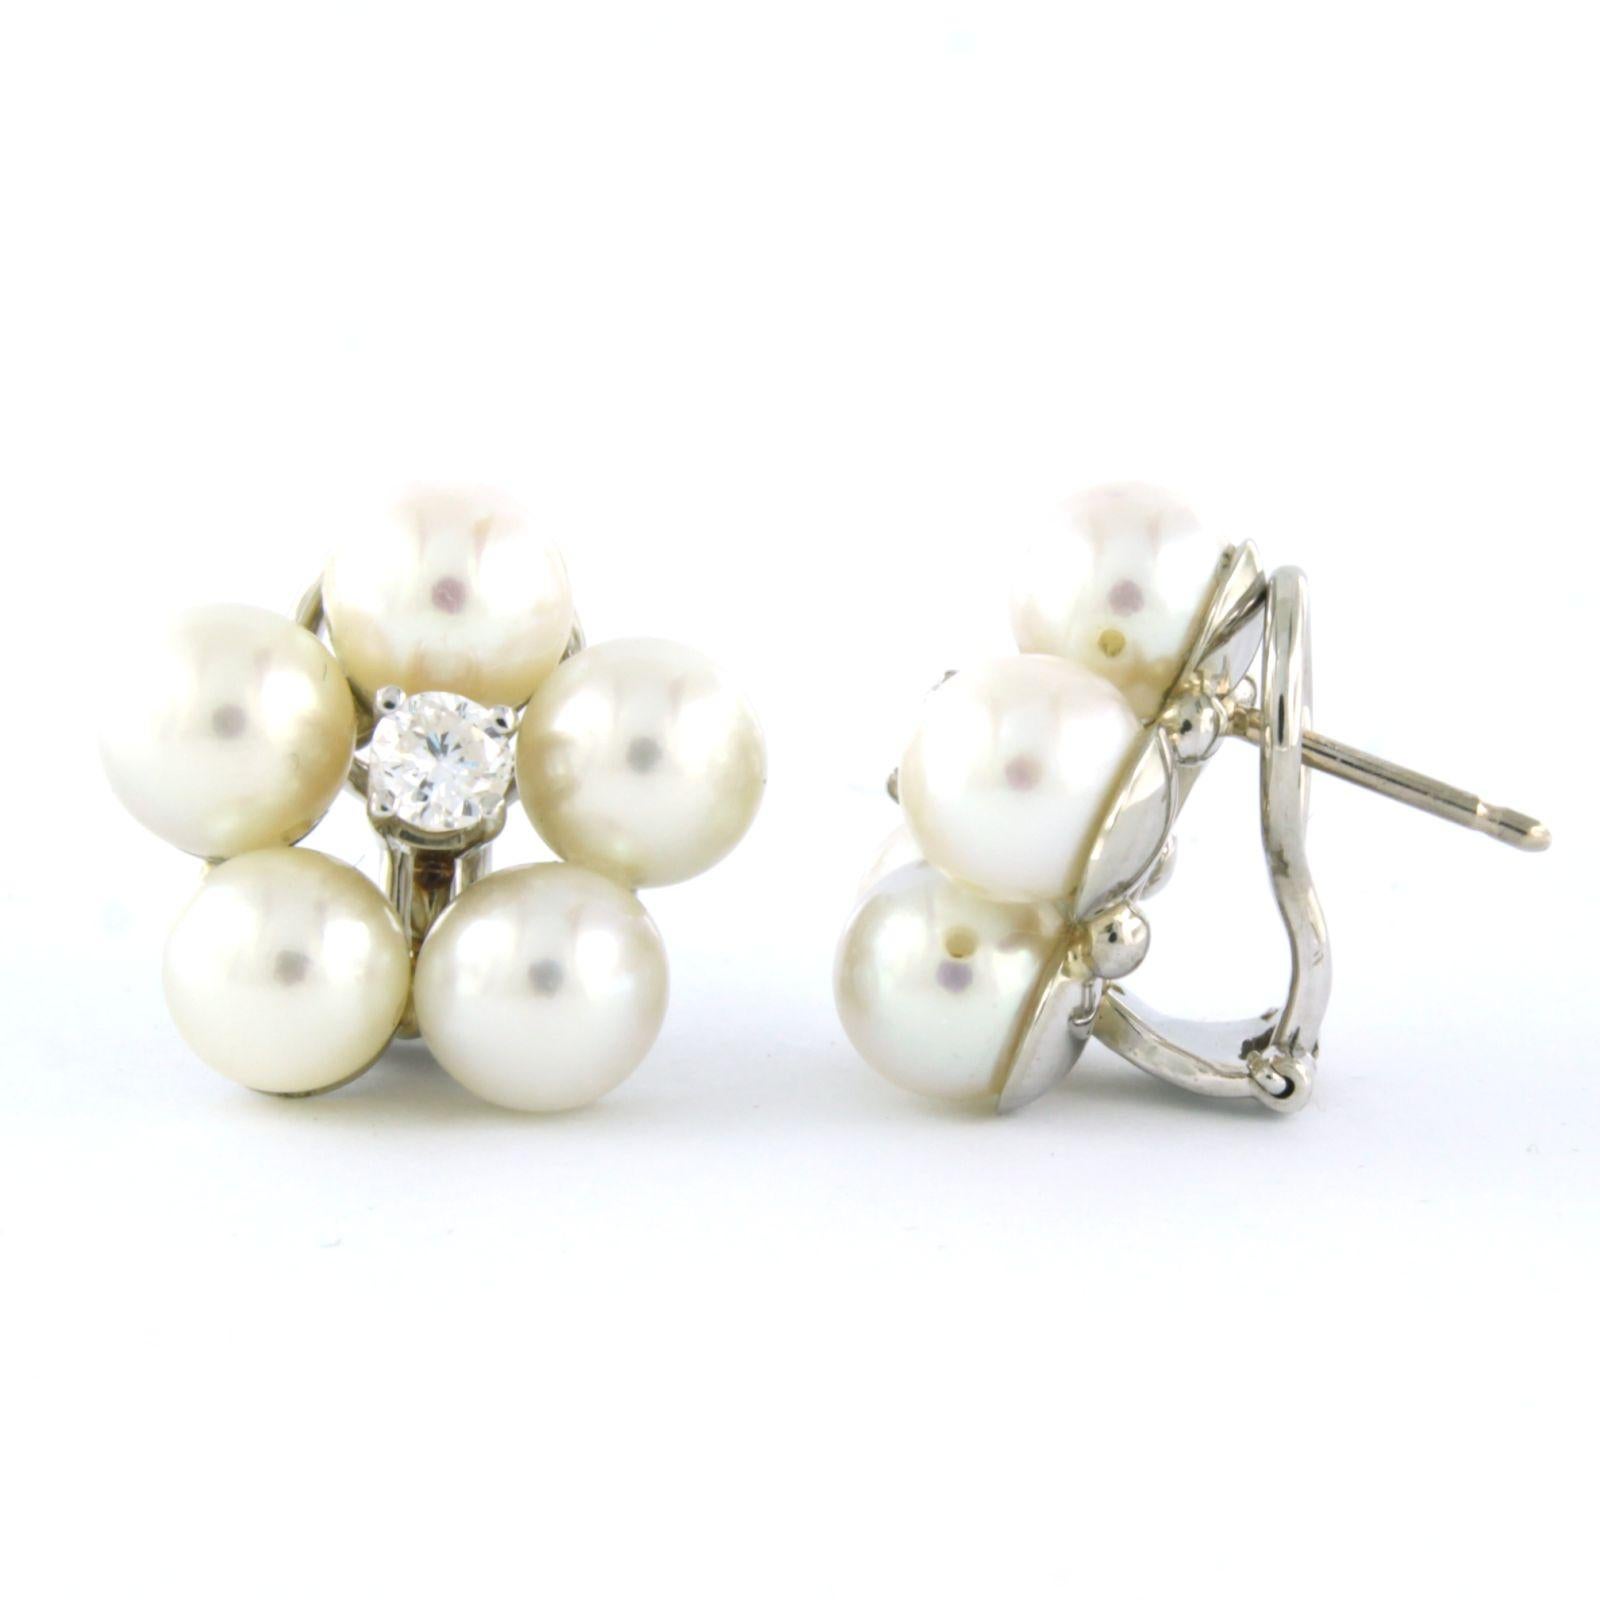 14k white gold clip-on earrings set with pearls and brilliant cut diamonds. 0.40ct - F/G - VS/SI

detailed description:

the size of the ear clip is 1.8 cm high and 1.8 cm wide

weight: 11.2 grams

occupied with

- 10 x 6.6 mm freshwater